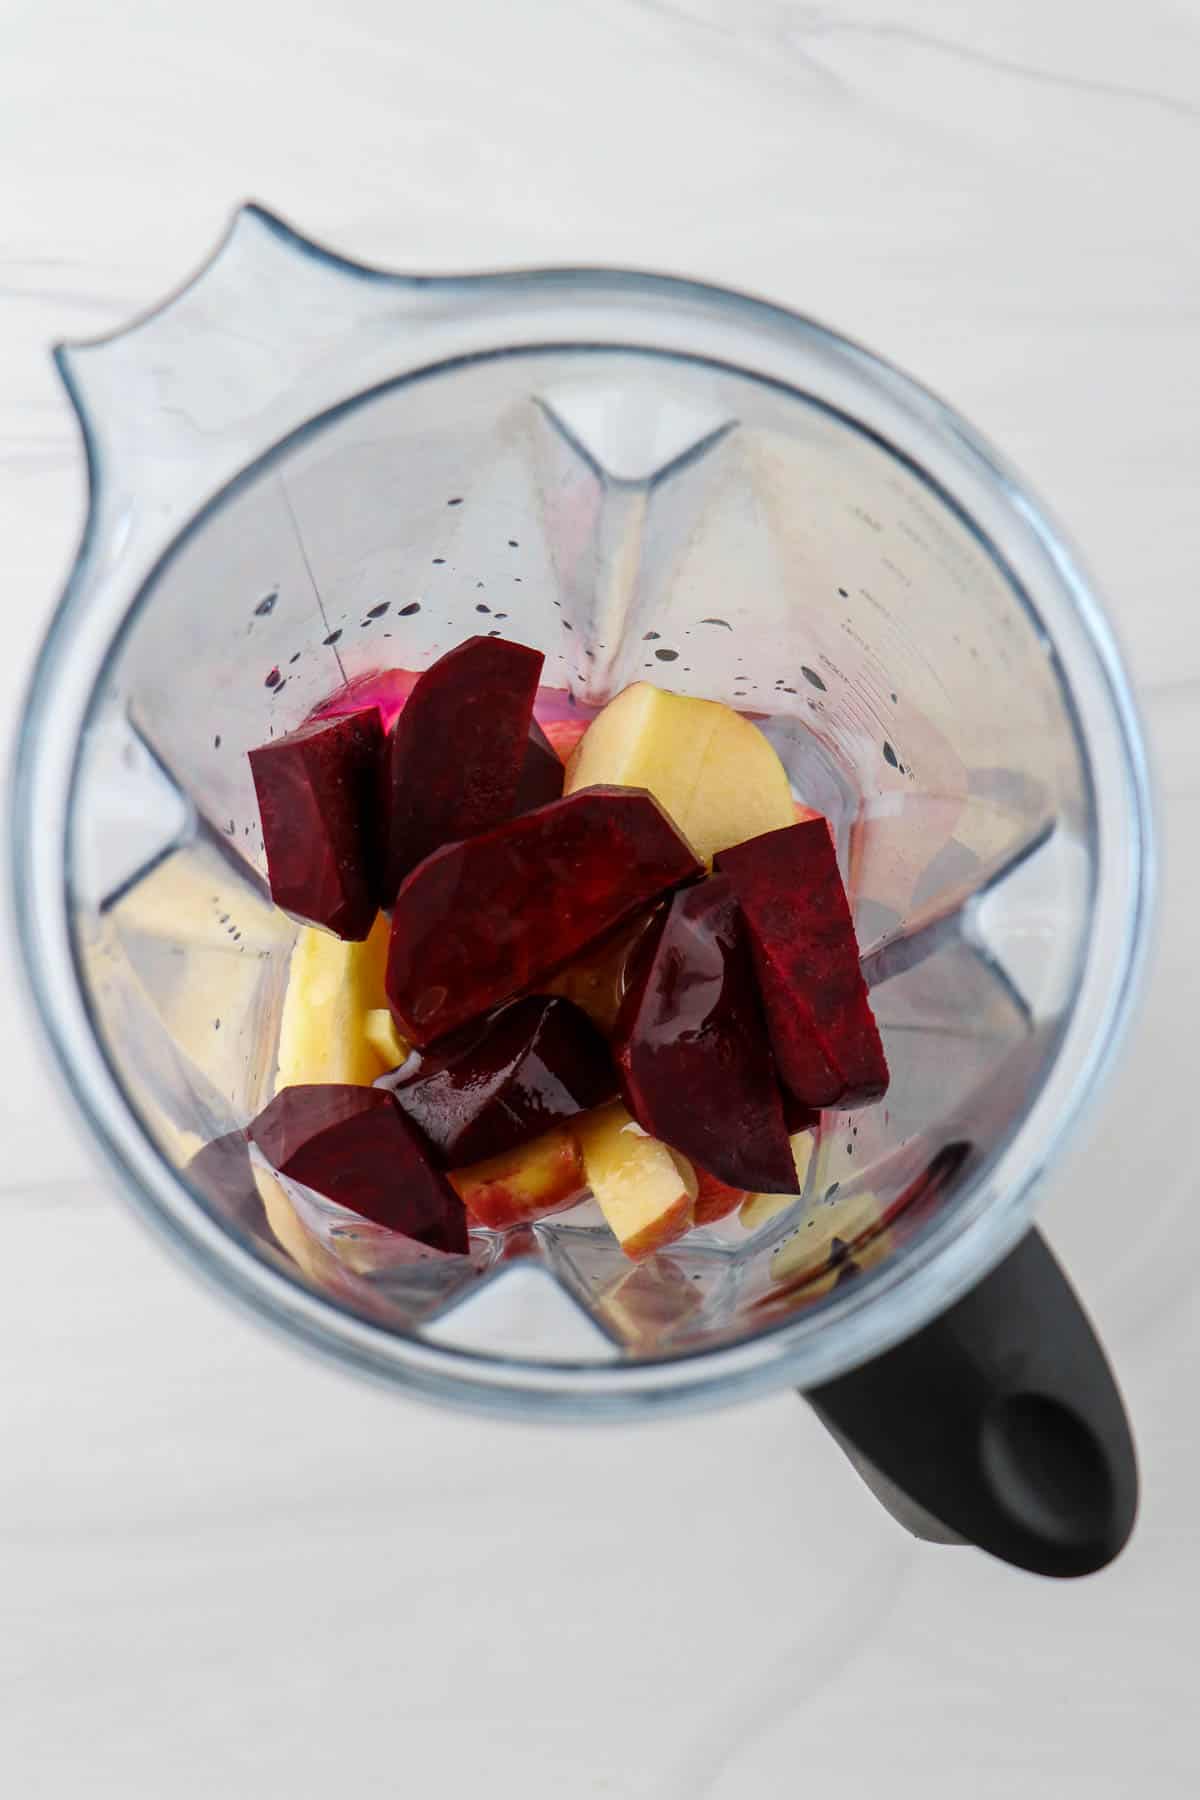 Chopped beets and apples in a blender.